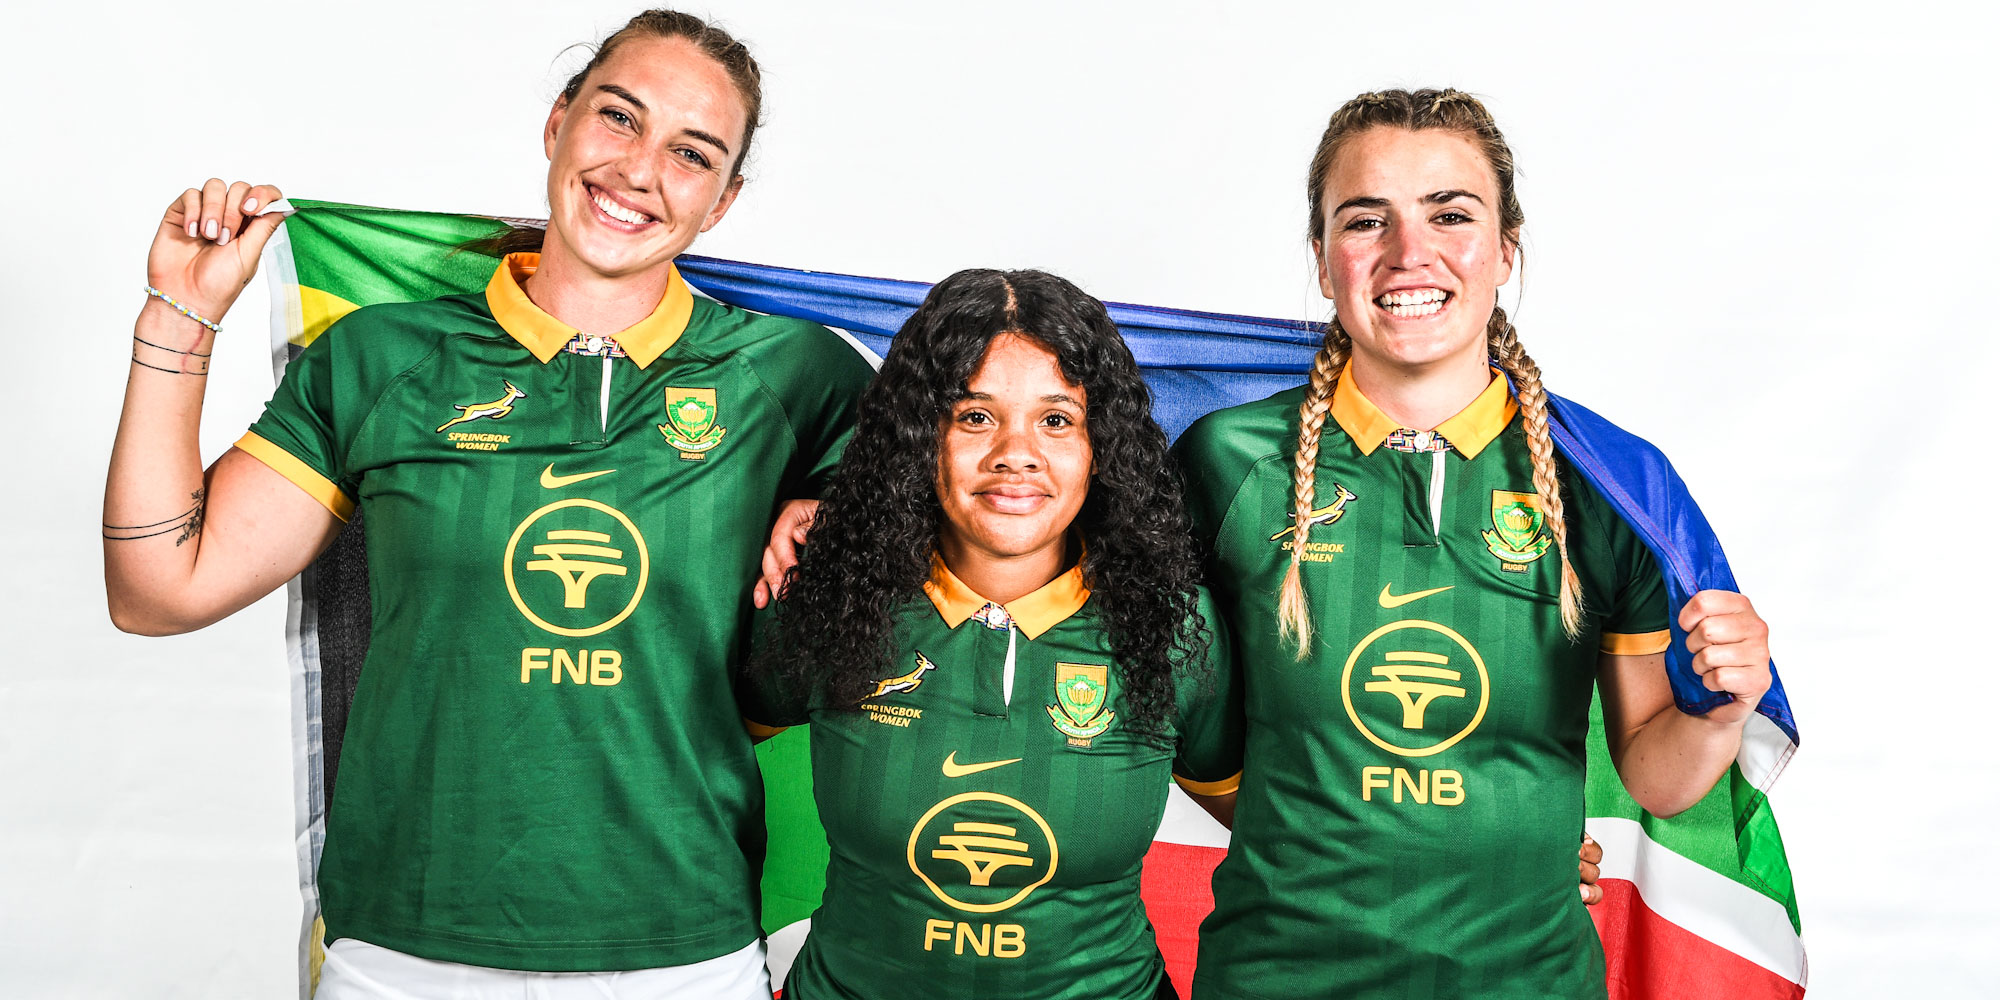 Danelle Lochner, Roseline Botes and Catha Jacobs will start in the pack against Kenya.